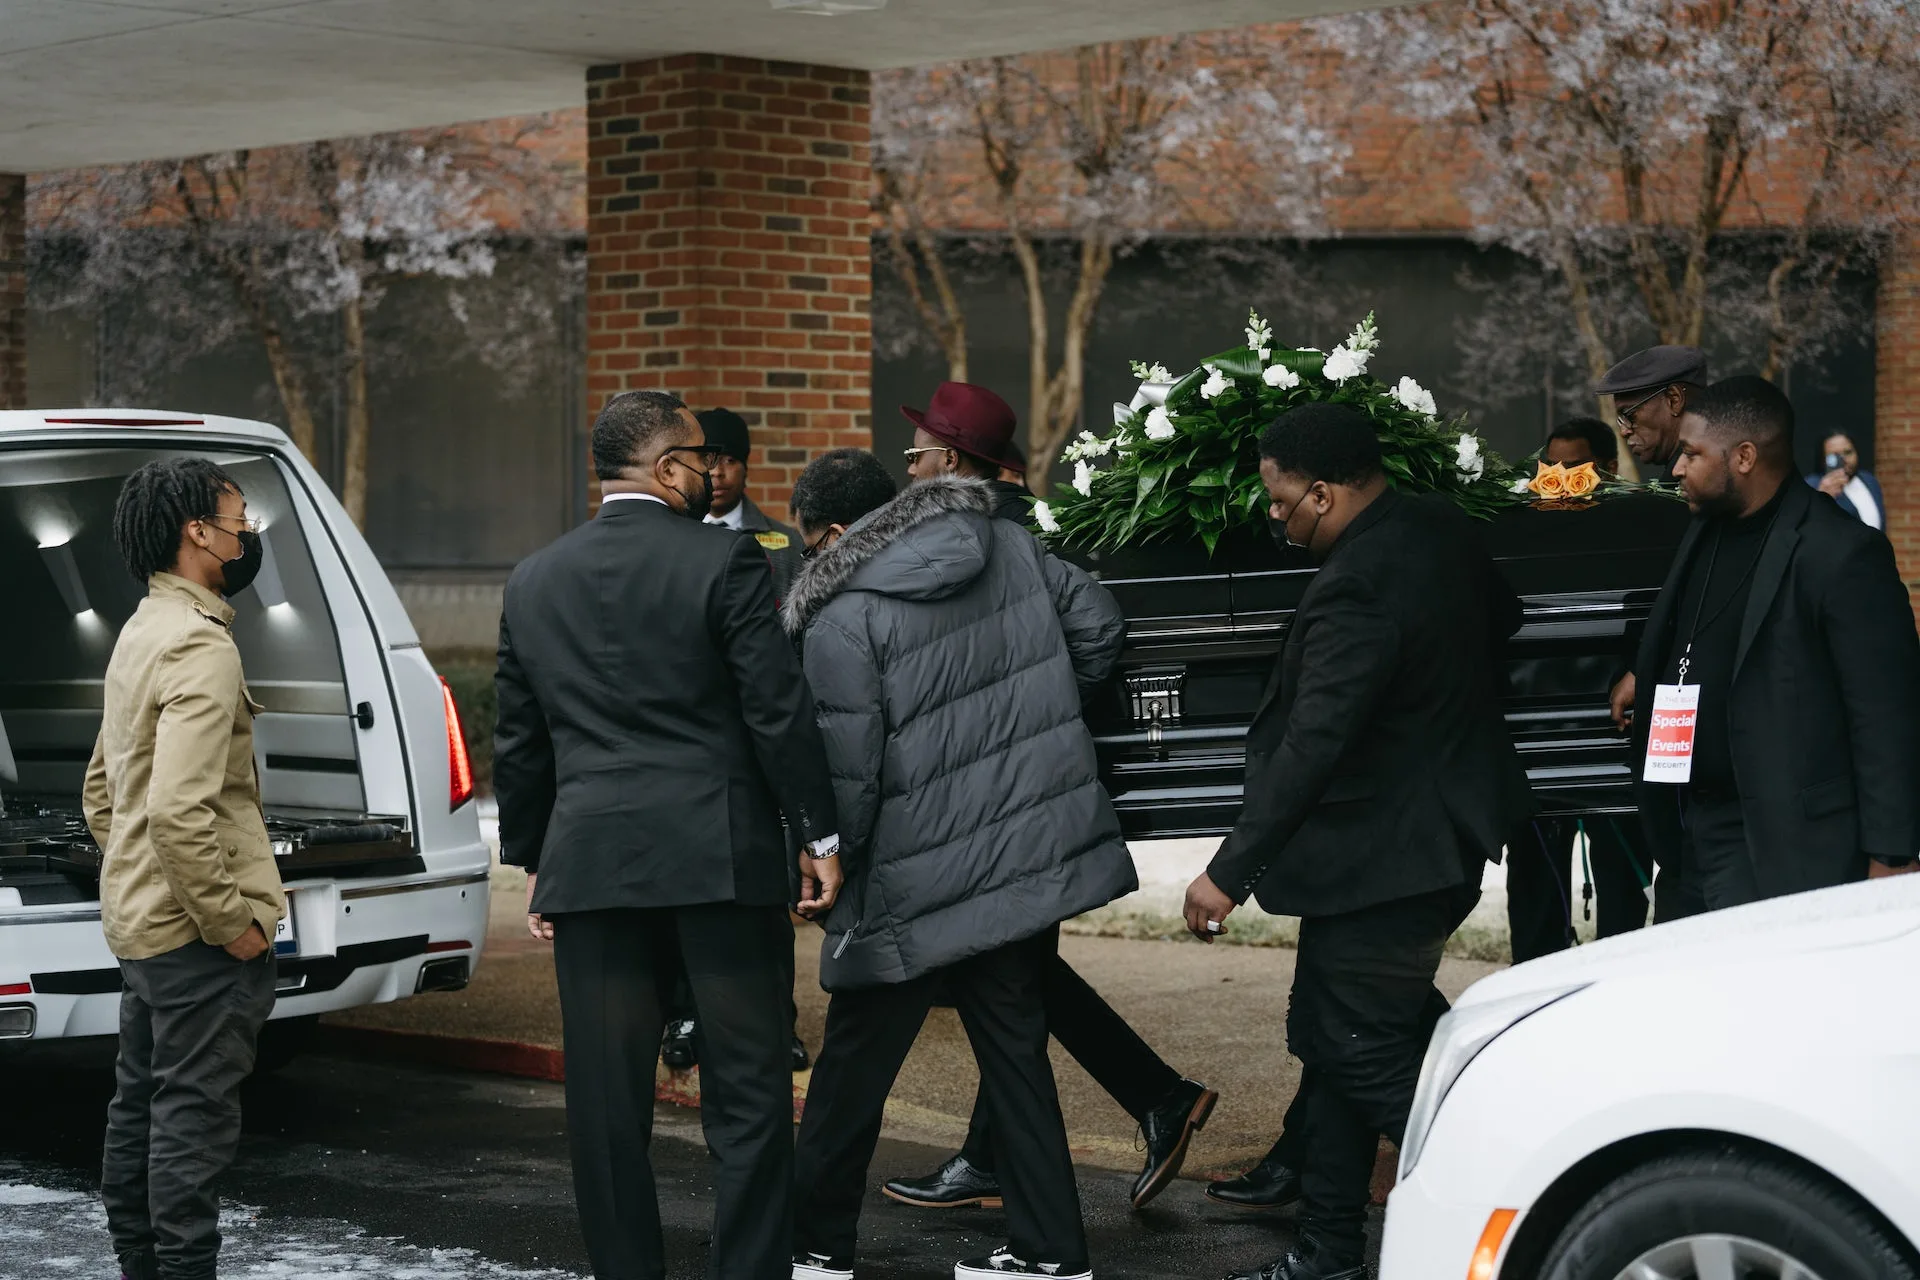 Mean wearing black and gray carry a black casket topped with white flowers to the open back of a white hearse.